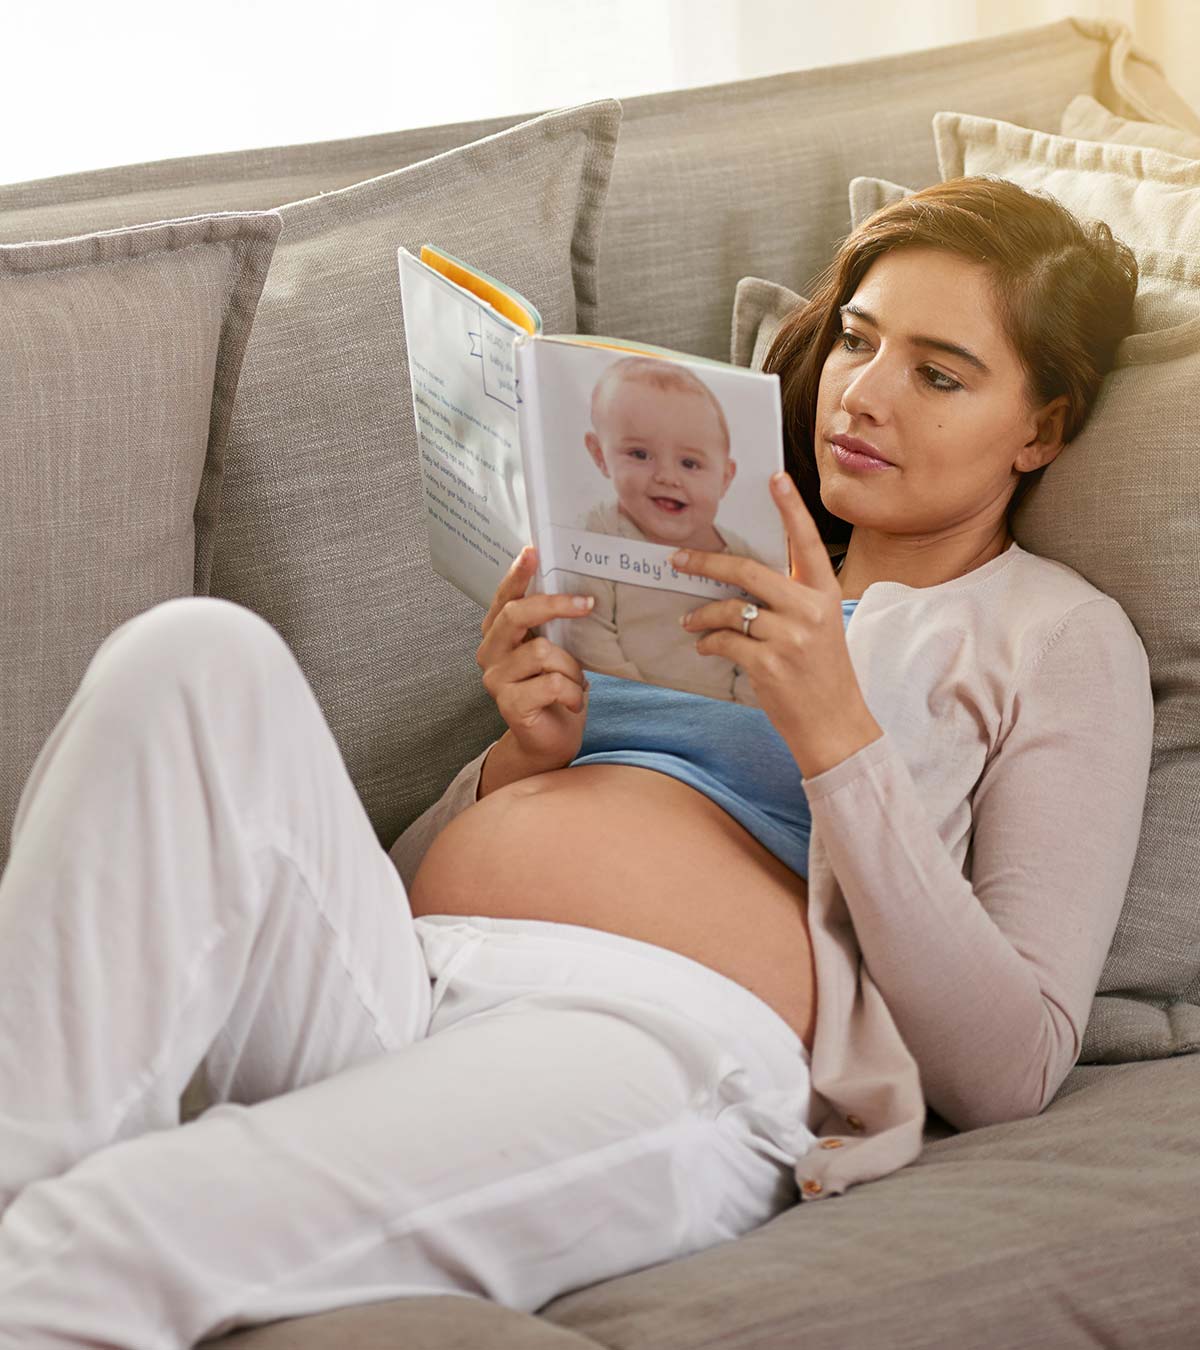 30 Best Pregnancy Books For To-Be Moms And Dads of 2021